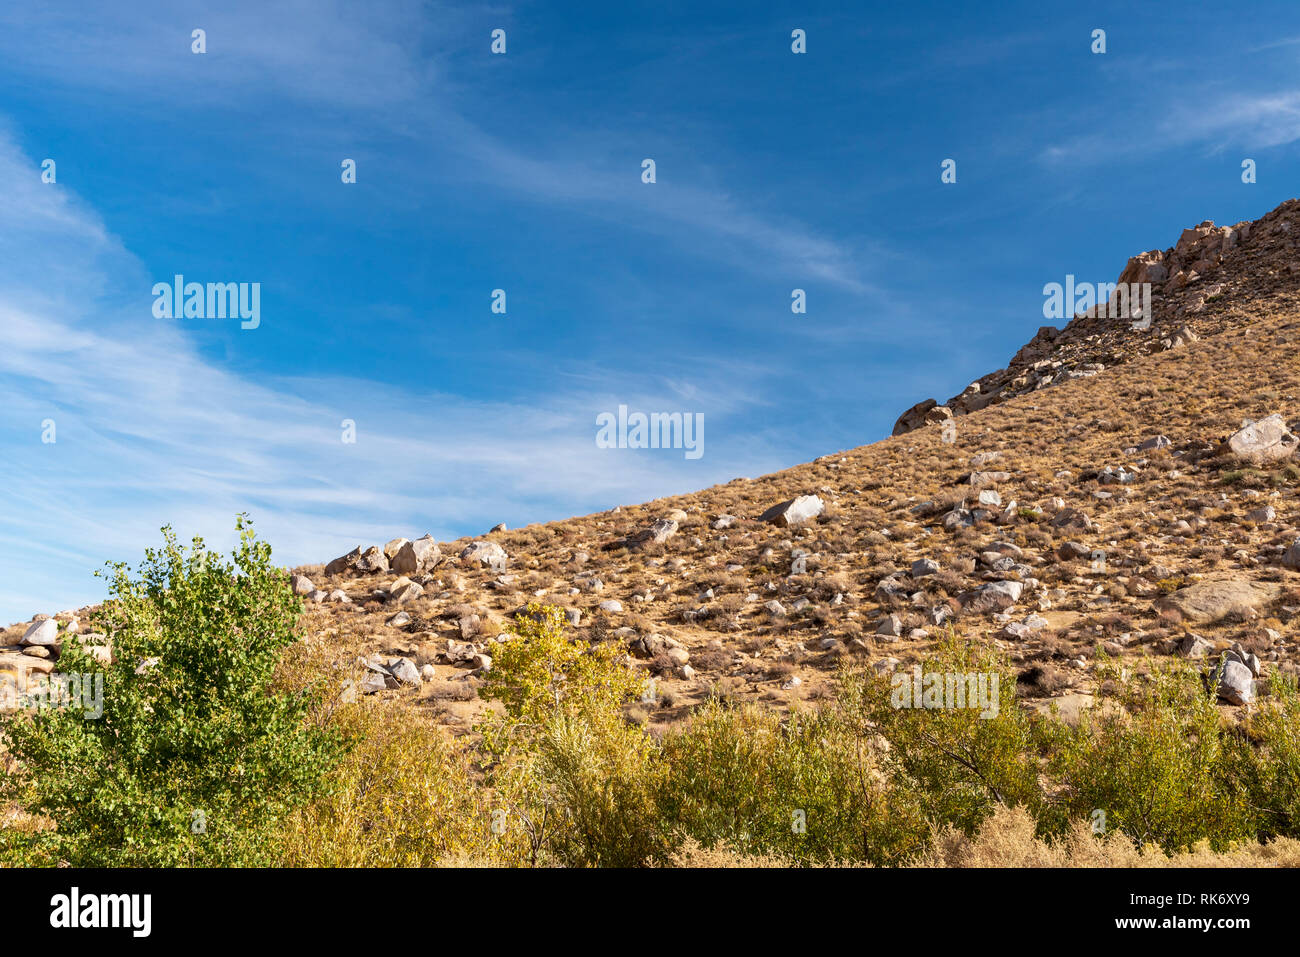 Green trees beneath rocky desert mountain side under bright blue sky with white clouds. Stock Photo